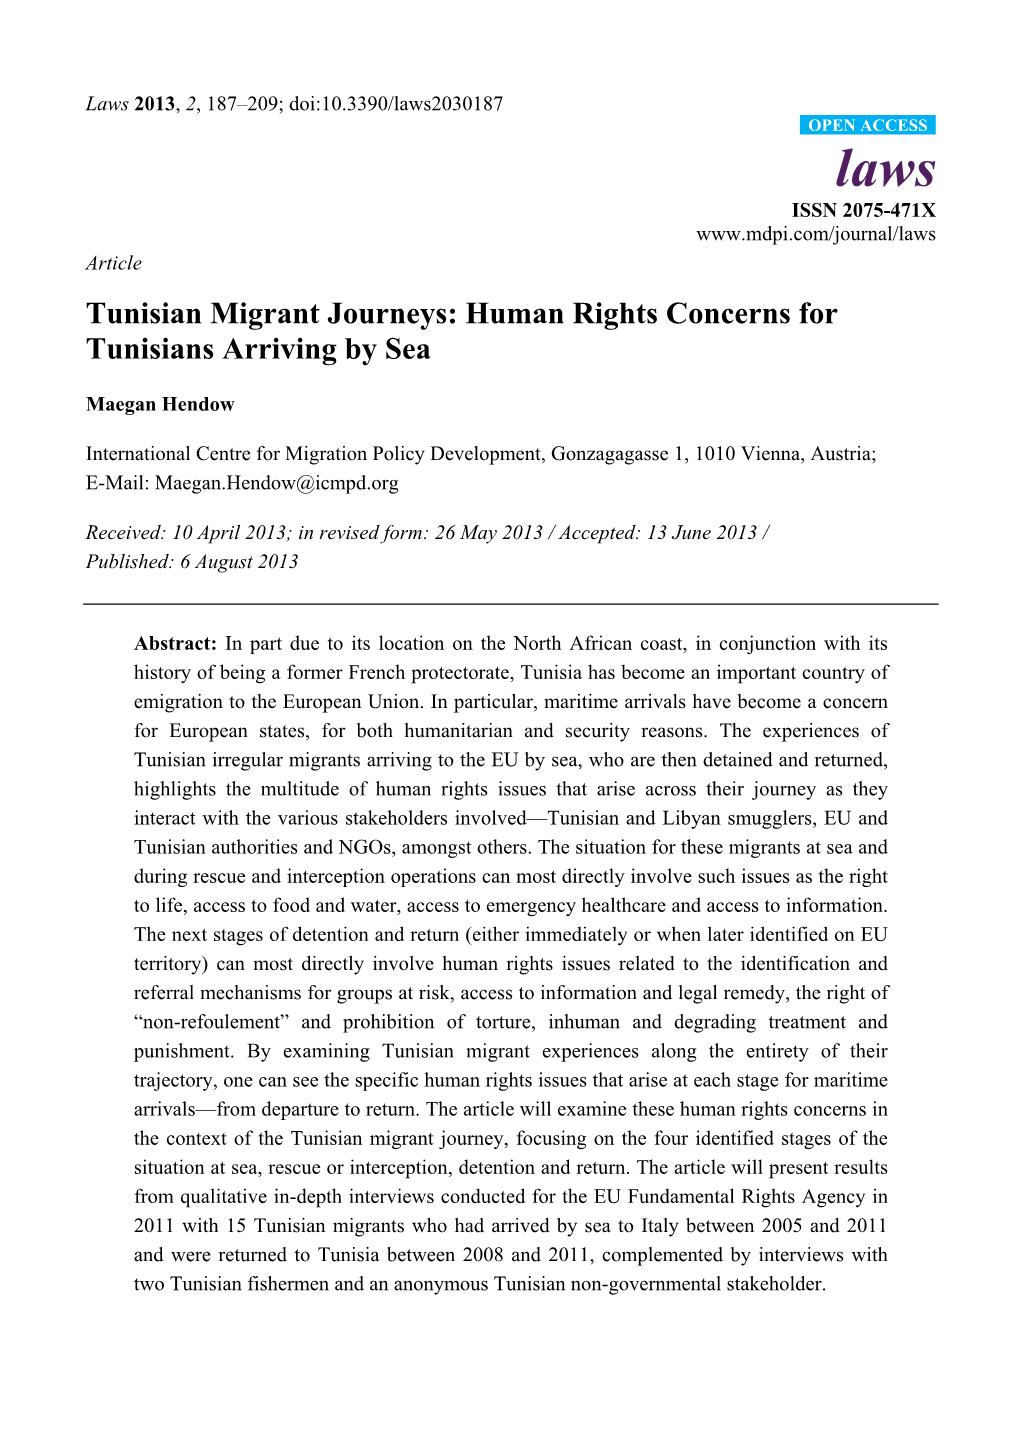 Tunisian Migrant Journeys: Human Rights Concerns for Tunisians Arriving by Sea